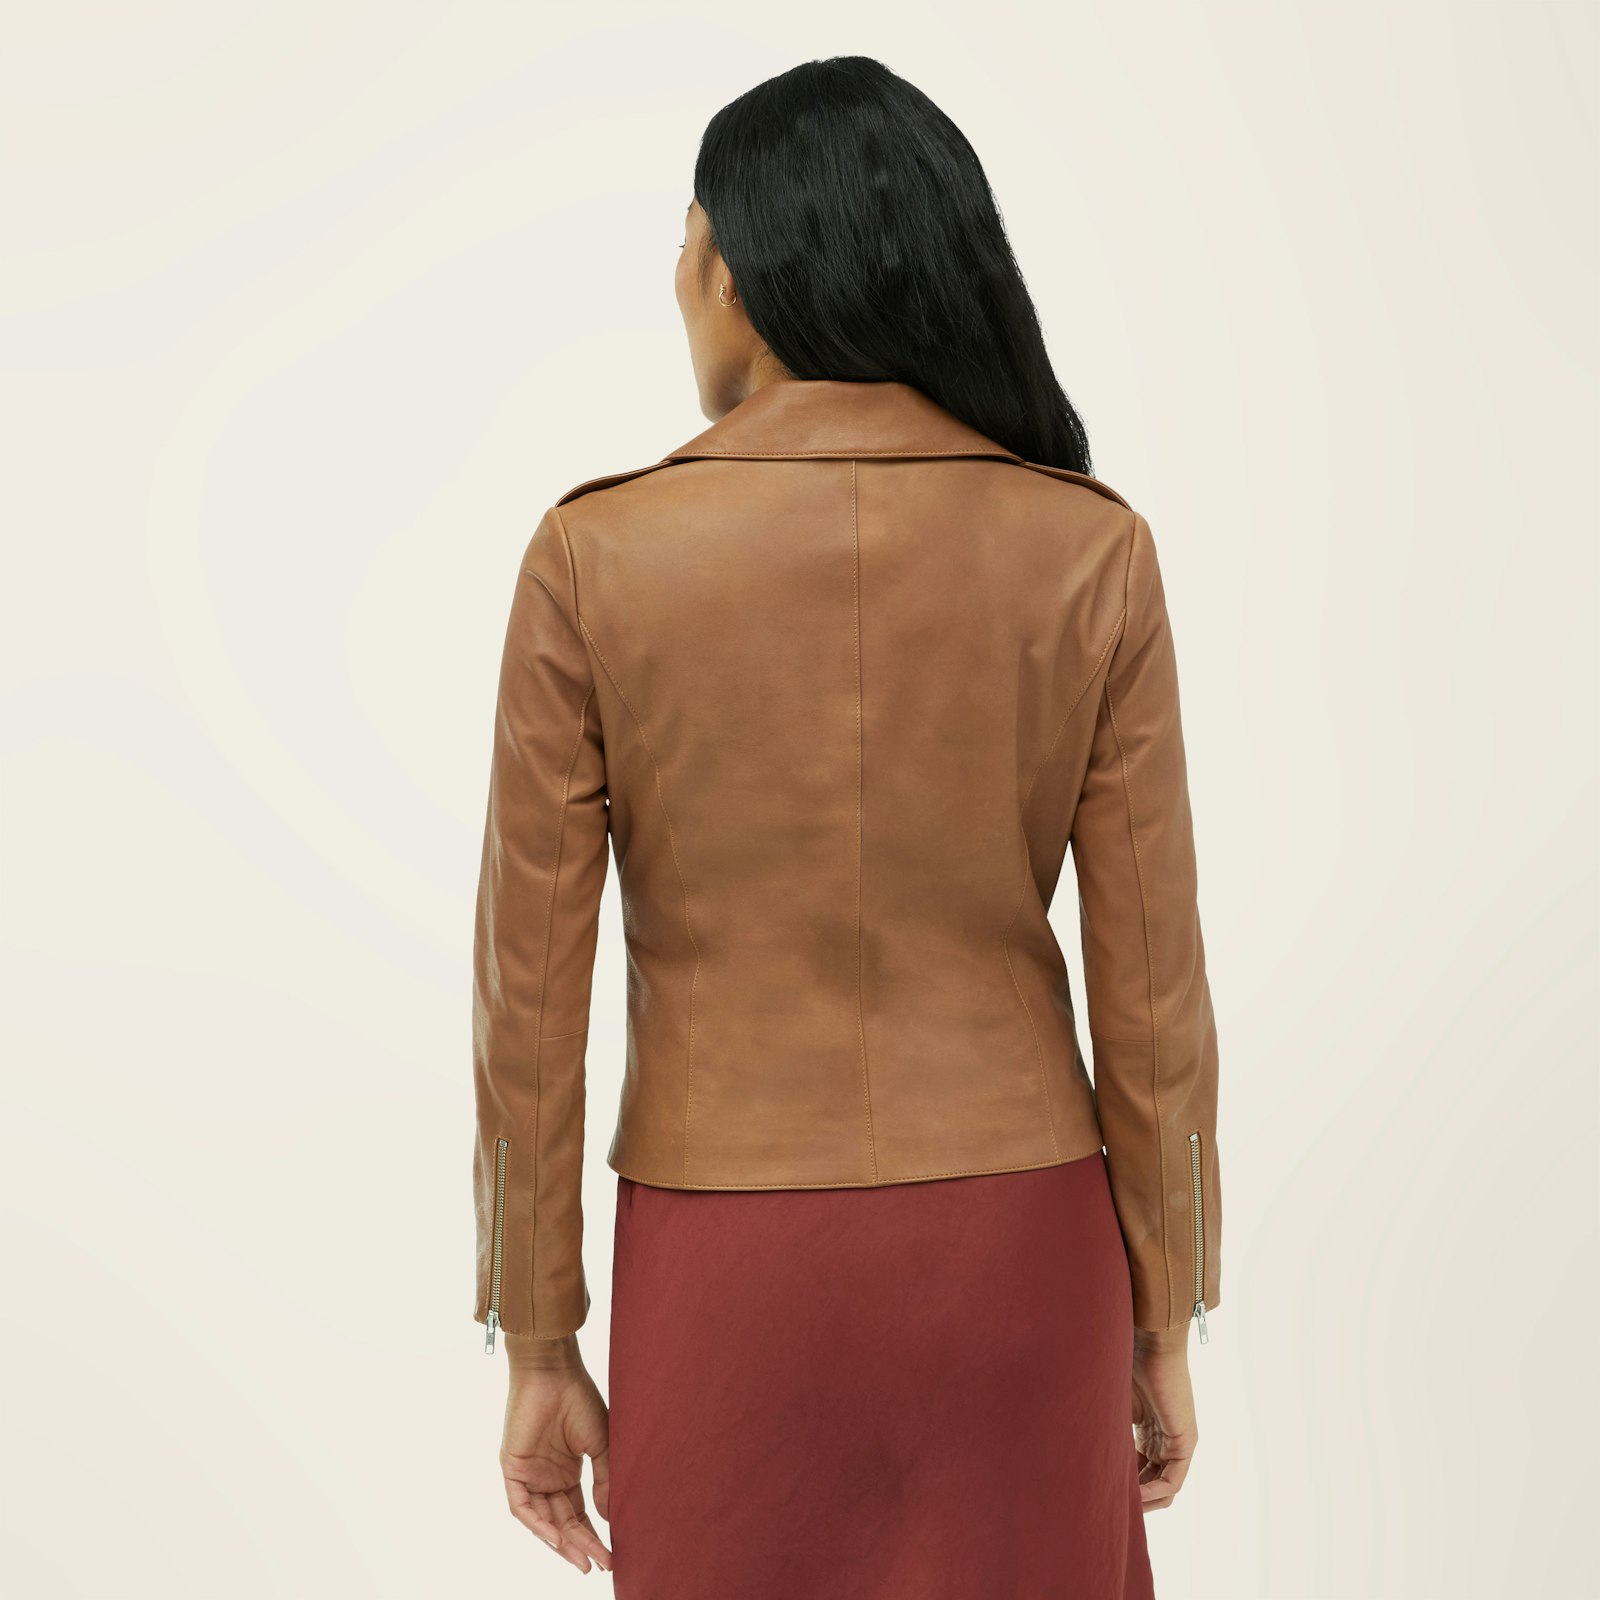 LouLeatherJacket_Brown_Small_Product_1x1_3956.jpg